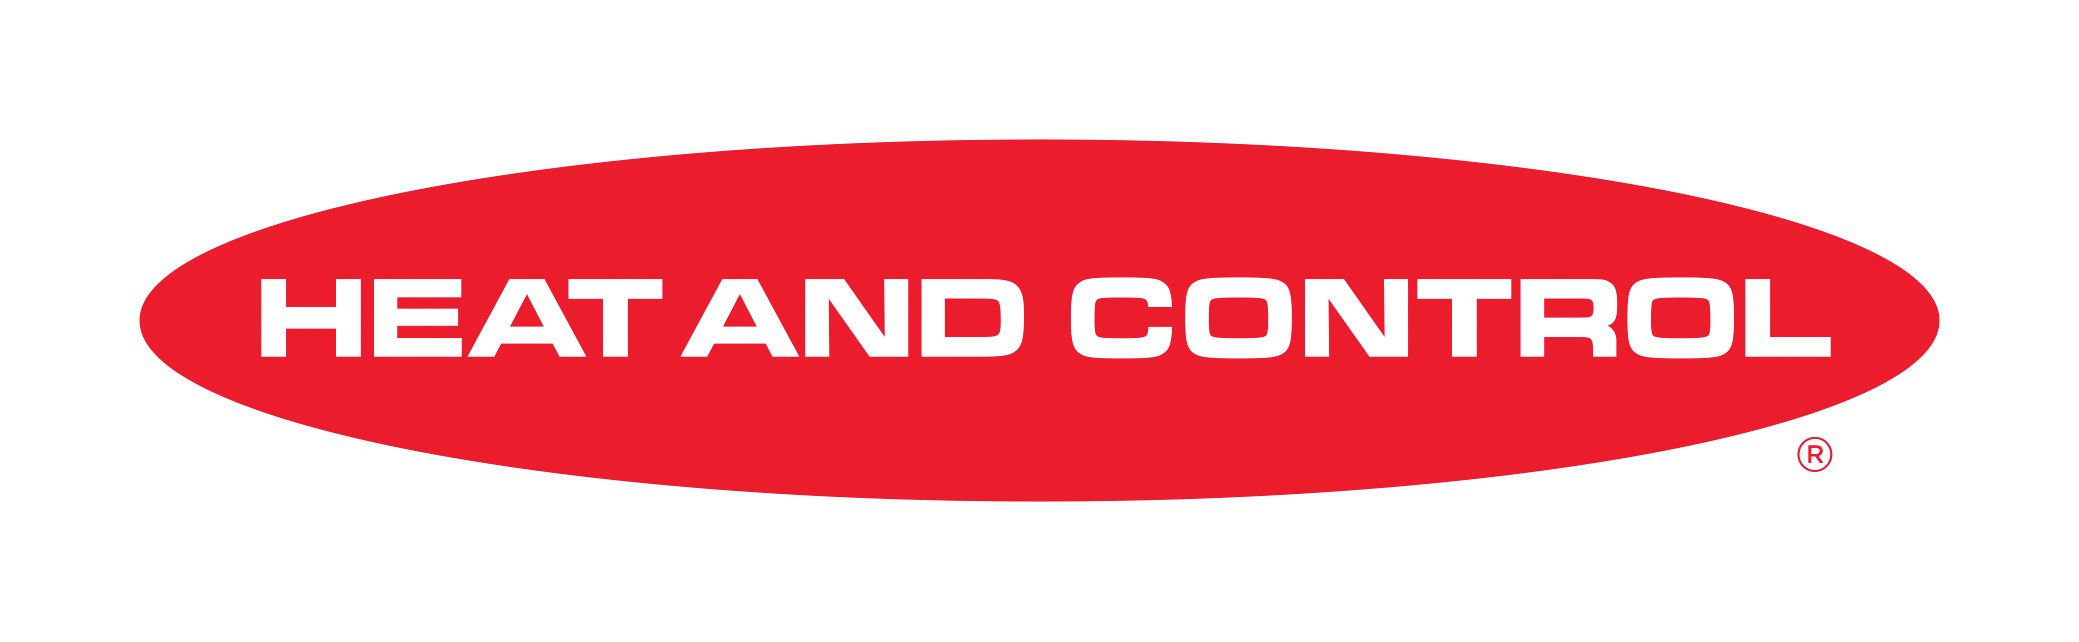 Heat and Control Logo